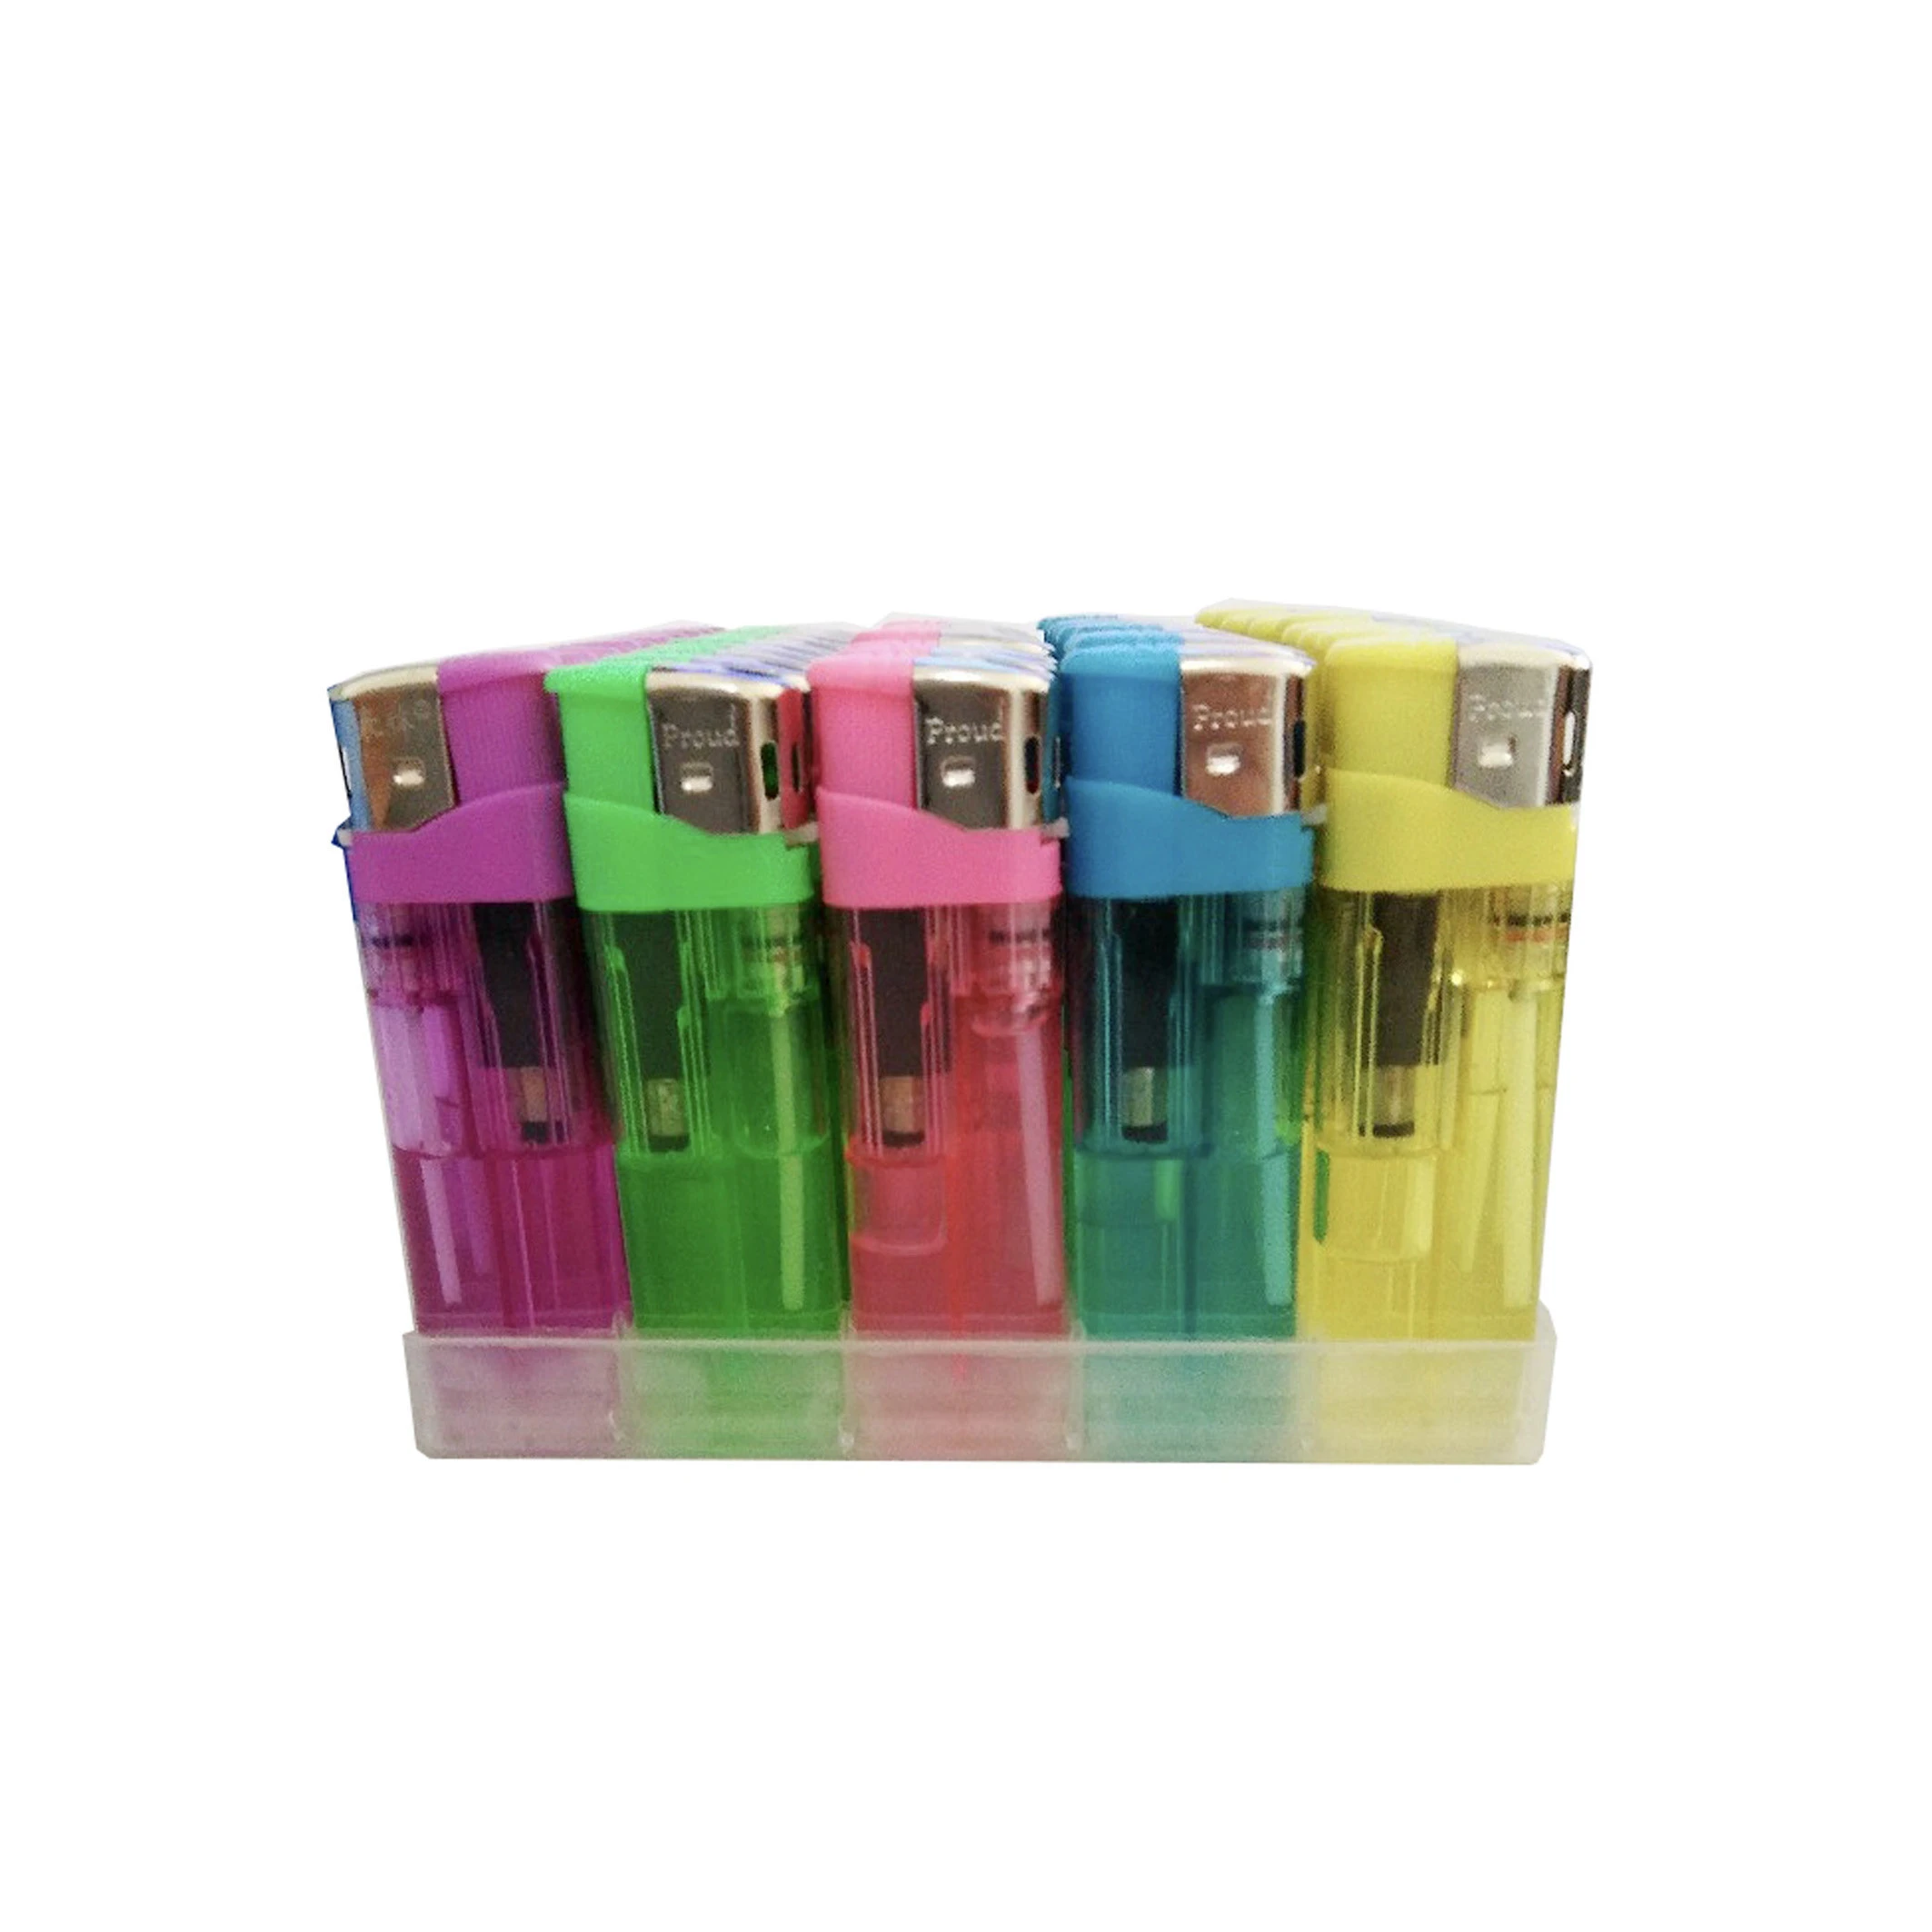 2020 popular electric disposable lighter with light dupont gas lighters plastic smoking accessories